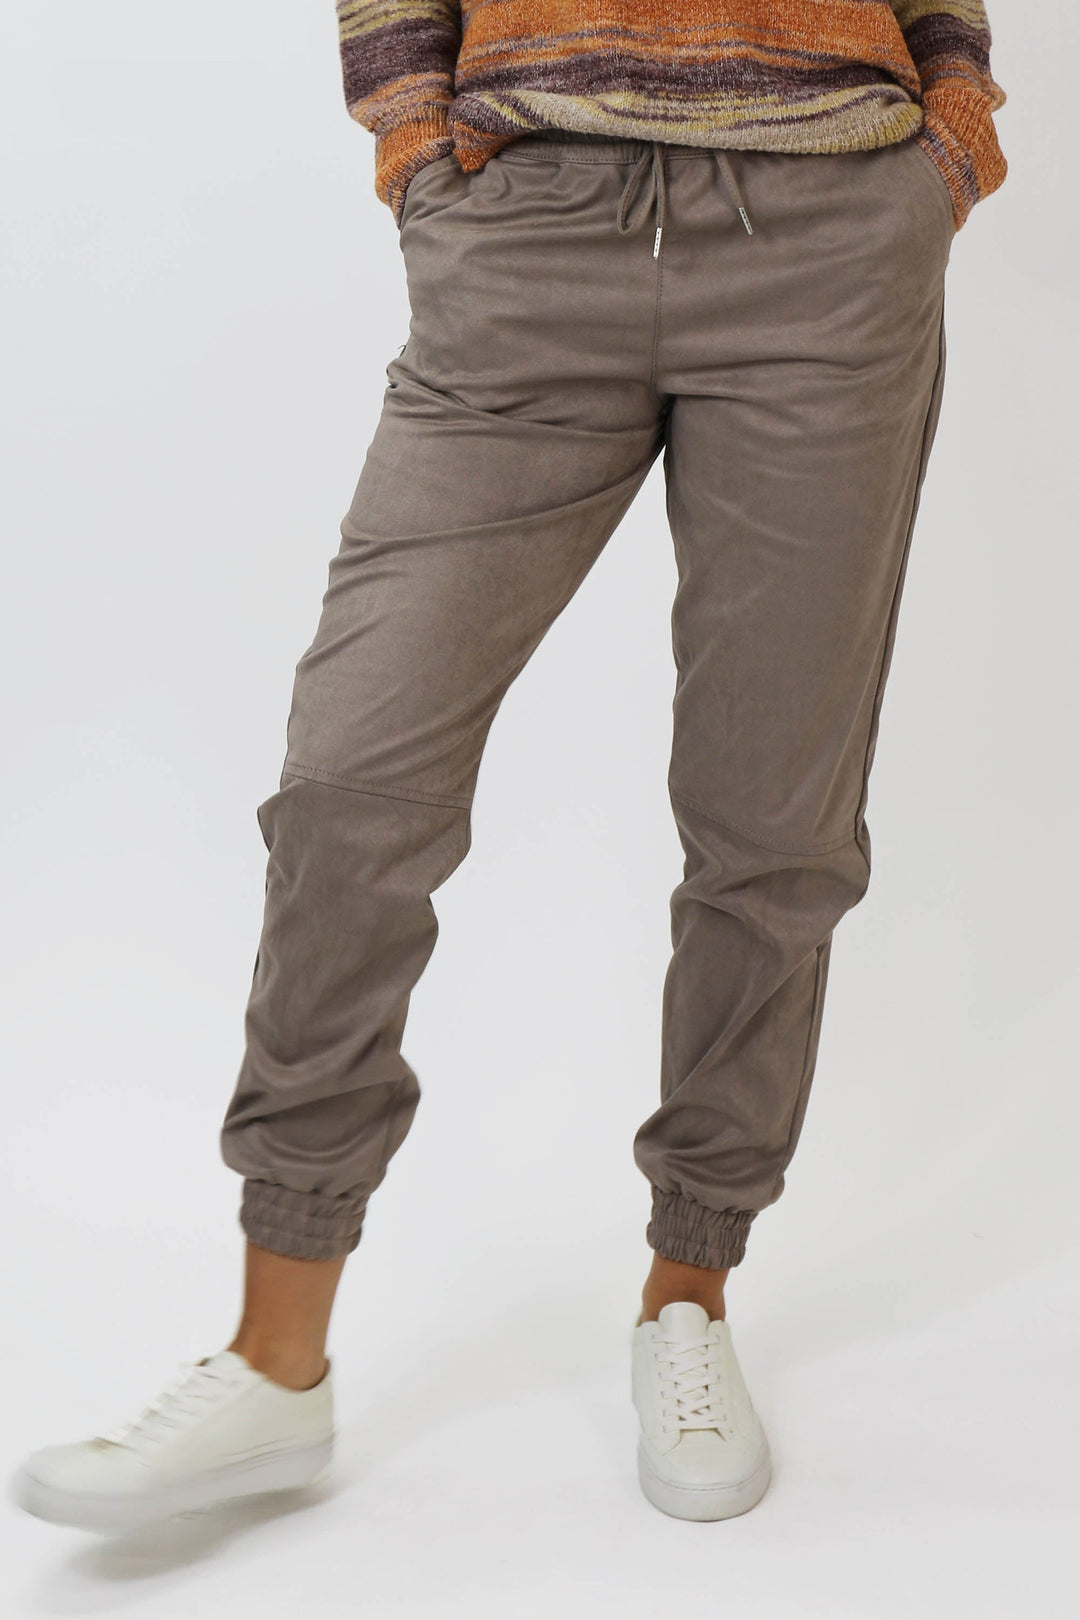 image of a female model wearing a JACEY SUPER HIGH RISE CROPPED JOGGER PANTS CHOCOLATE PANTS